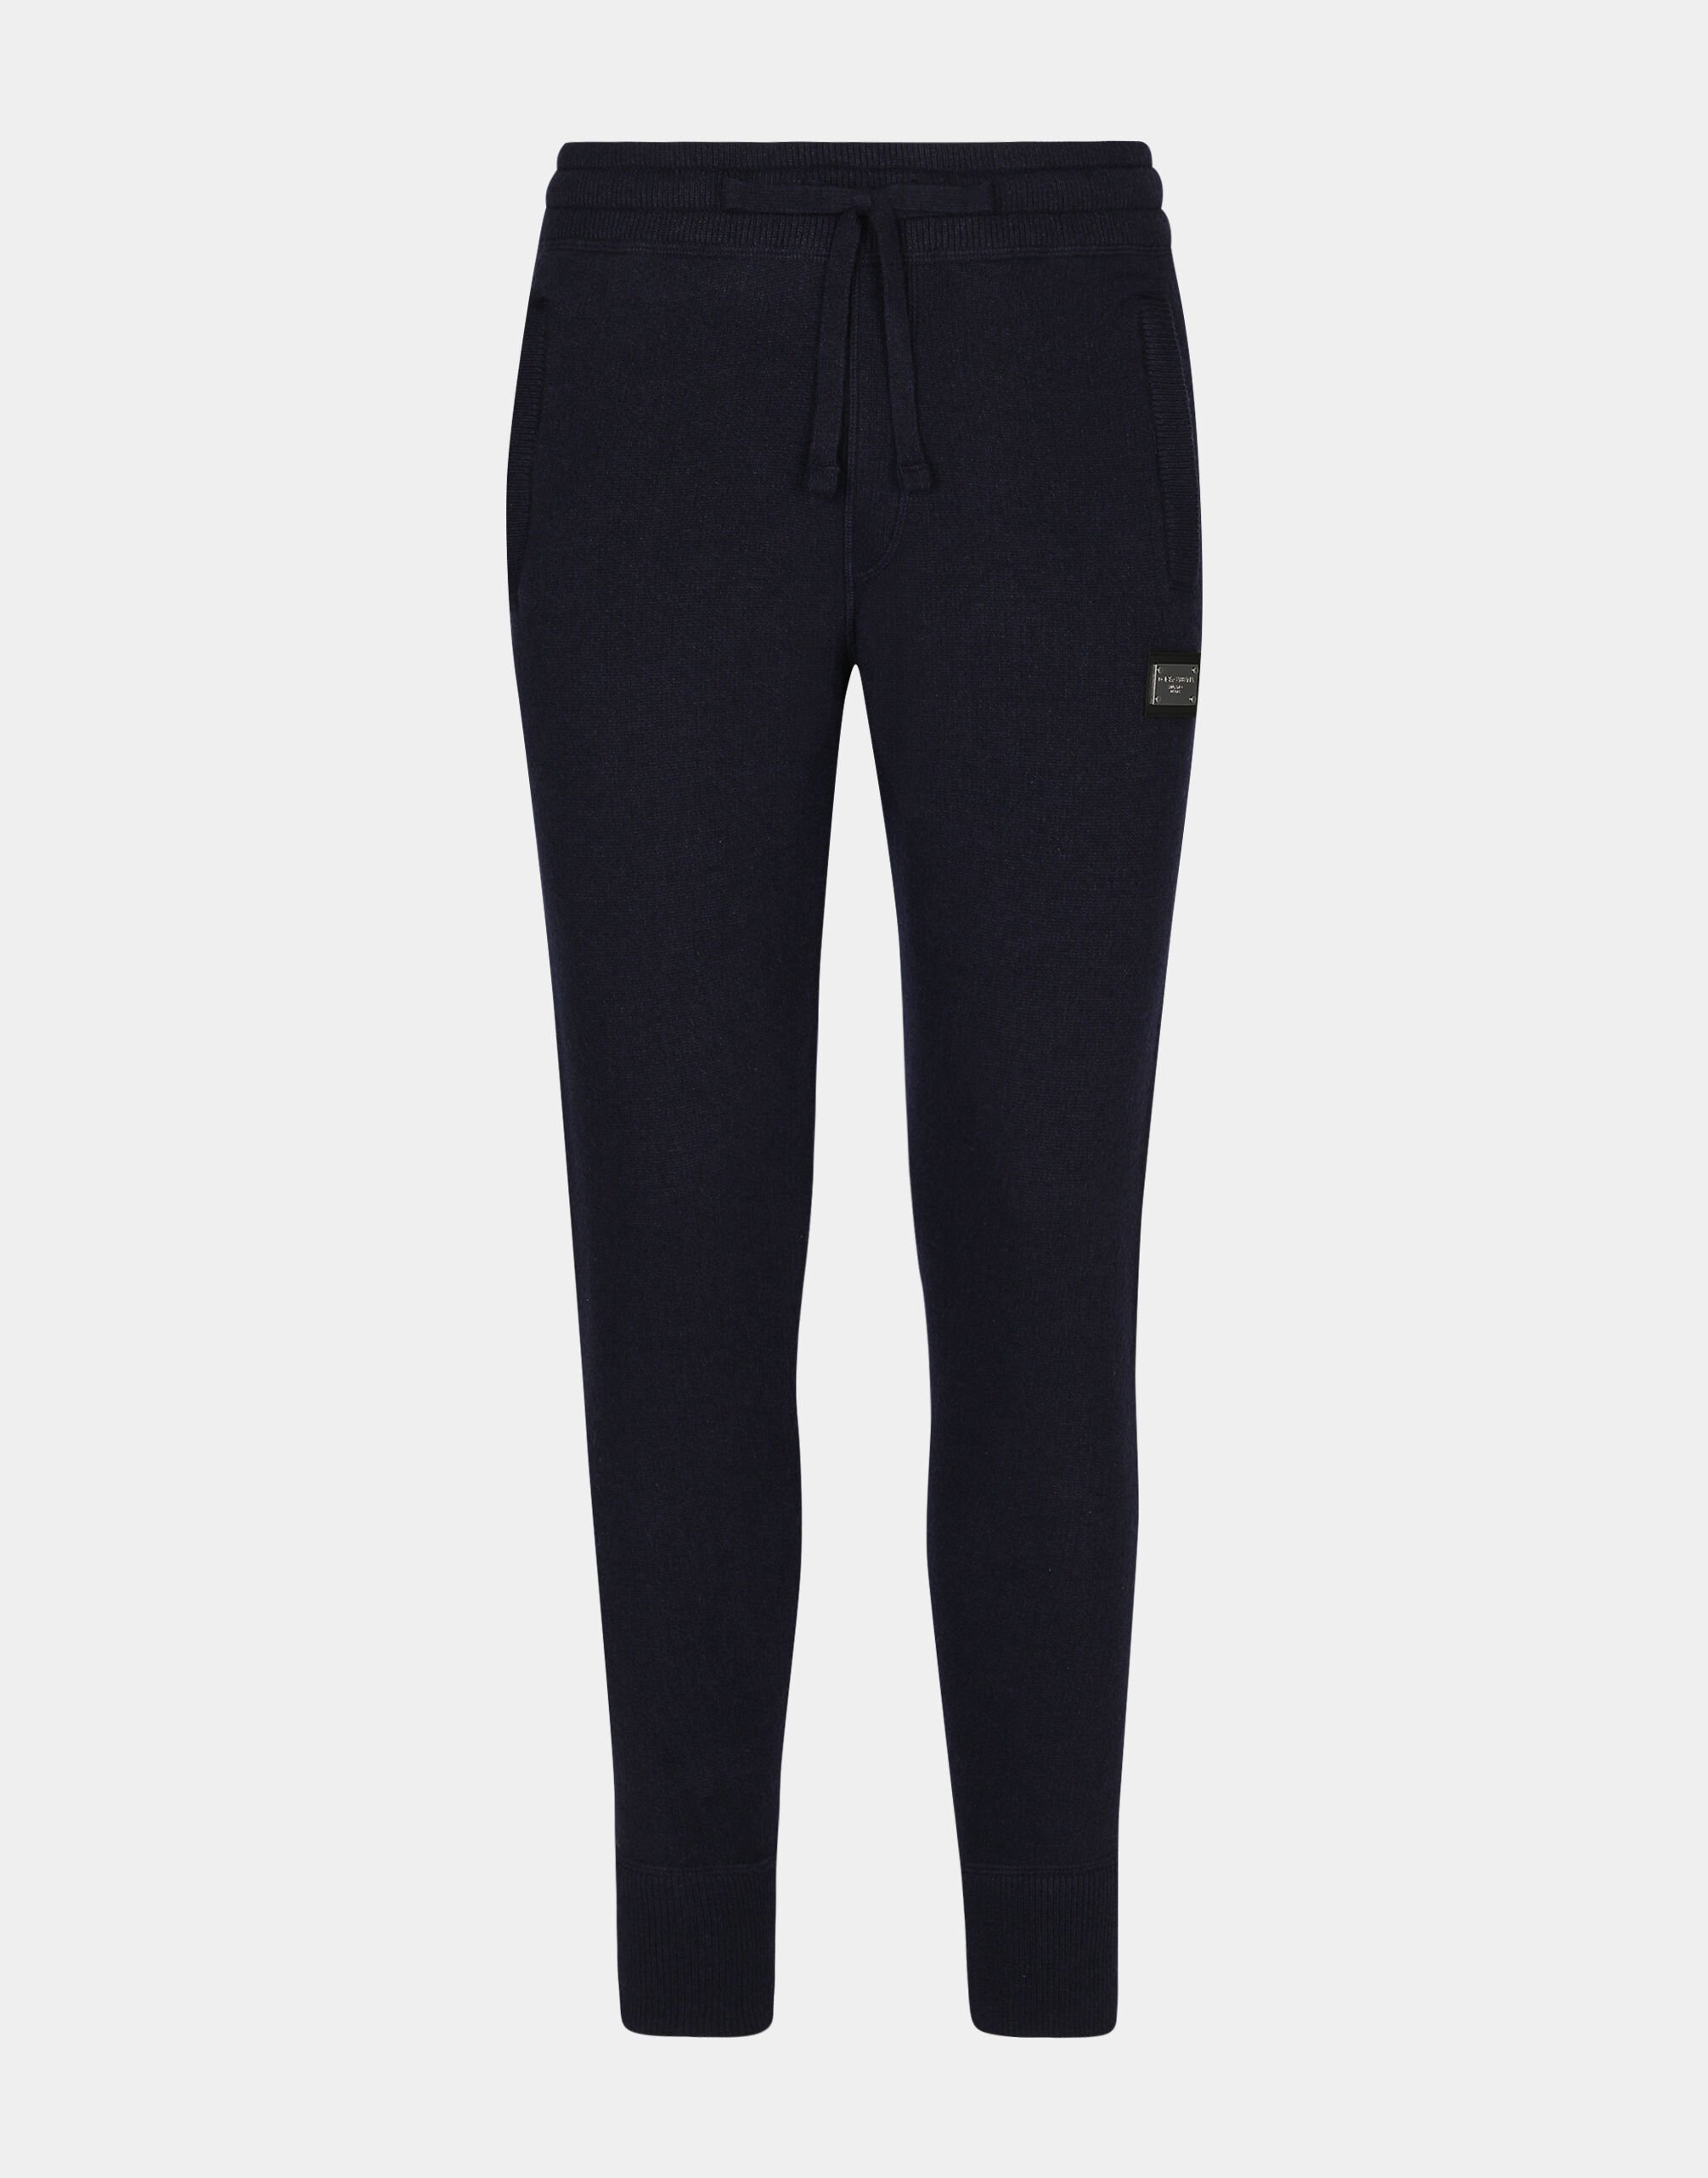 ${brand} Wool and cashmere knit jogging pants ${colorDescription} ${masterID}